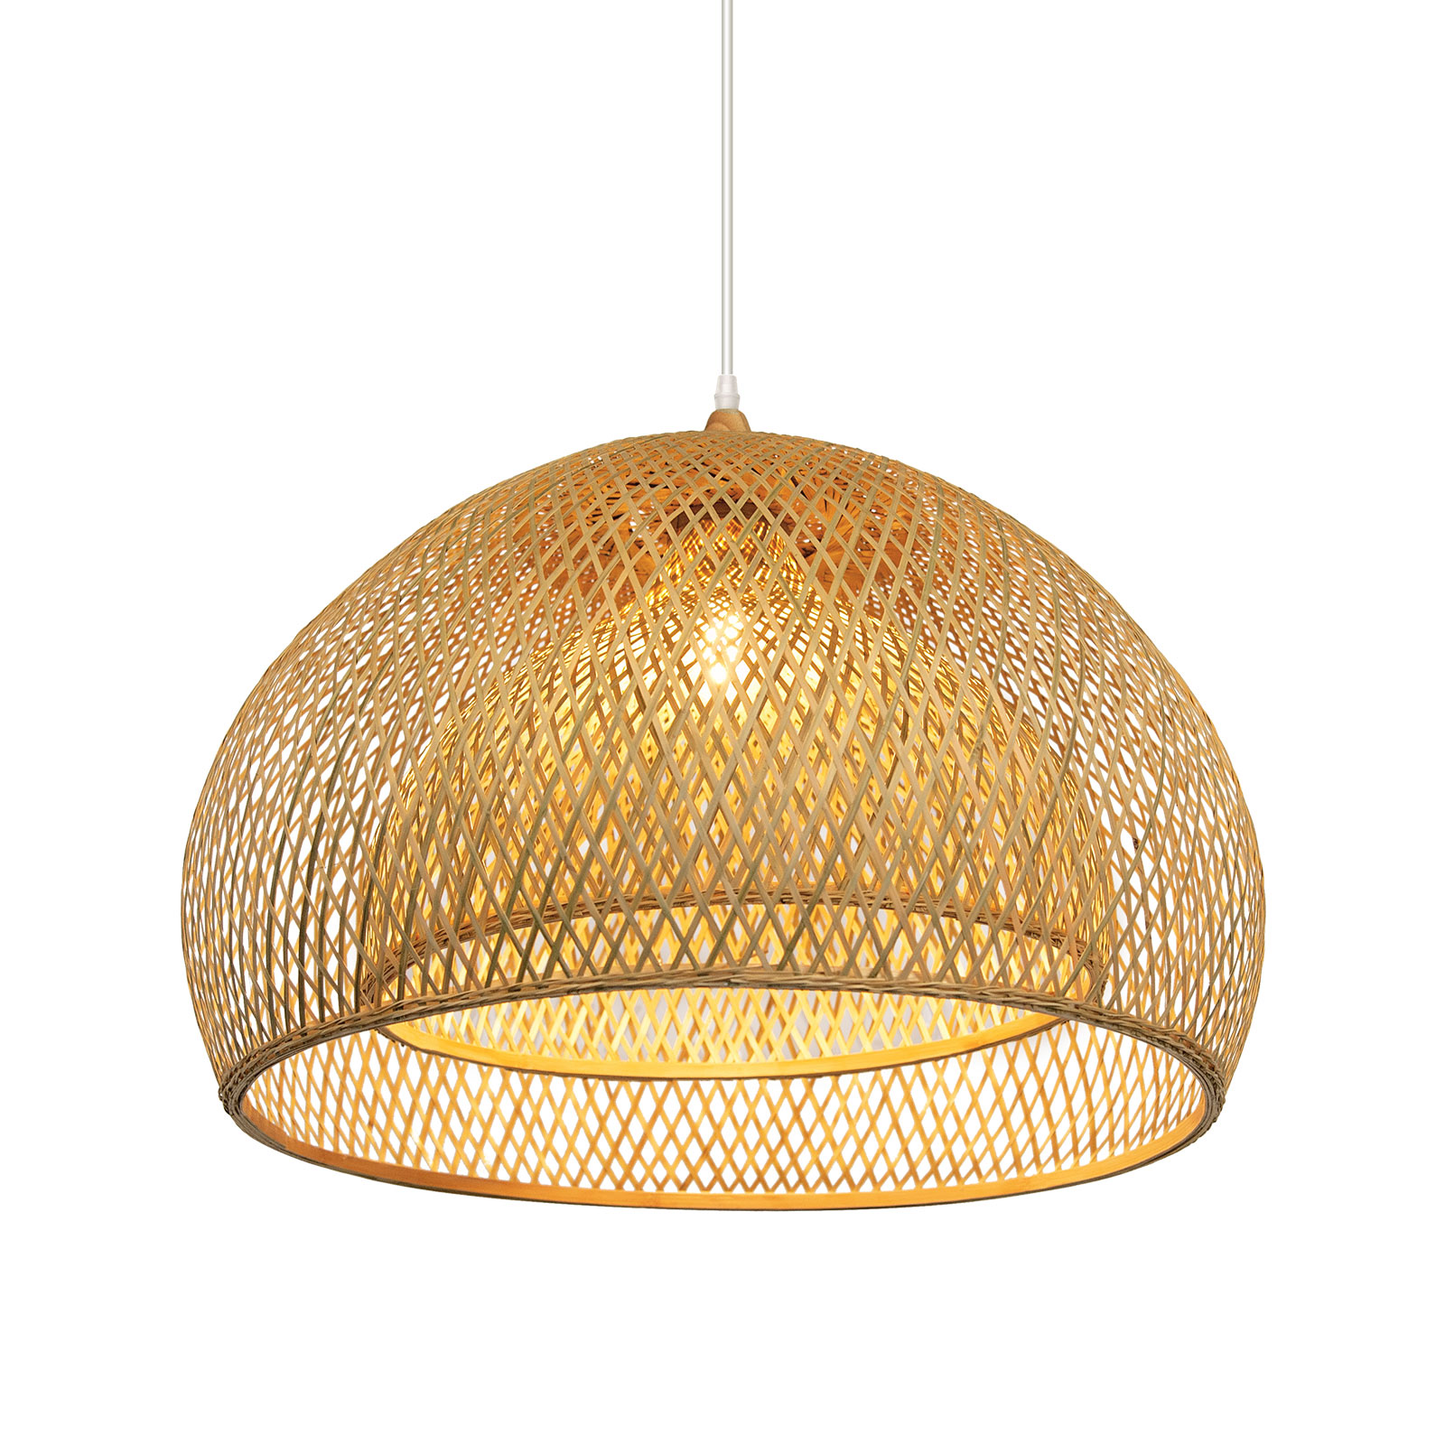 Dome Bamboo Ceiling Light Fixtures for Kitchen Island